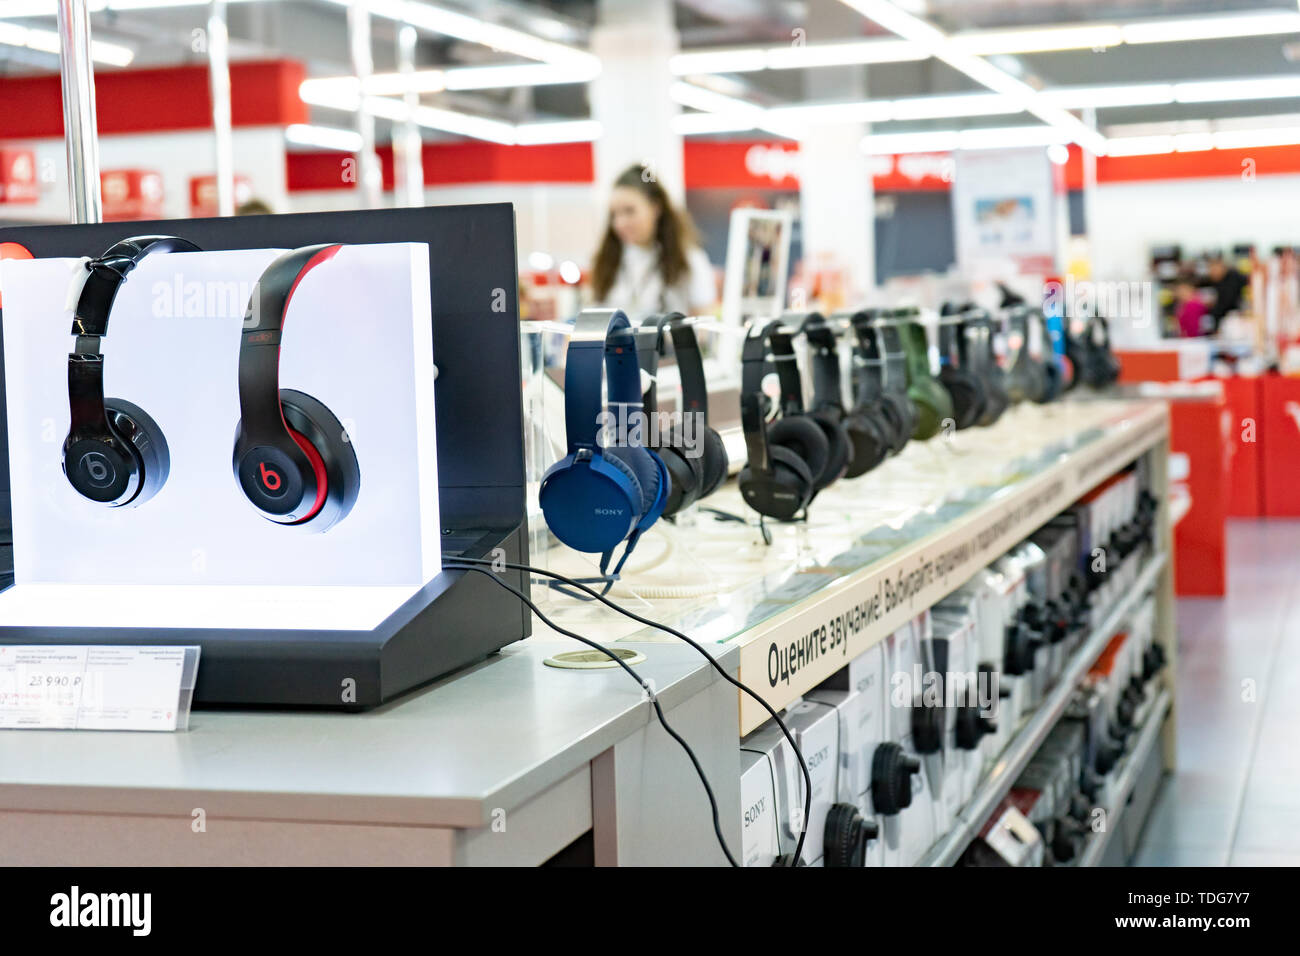 Chelyabinsk Region, Russia - June 2019. Household electrical appliances store M Video. Shelving with goods. Stereo headphones Stock Photo